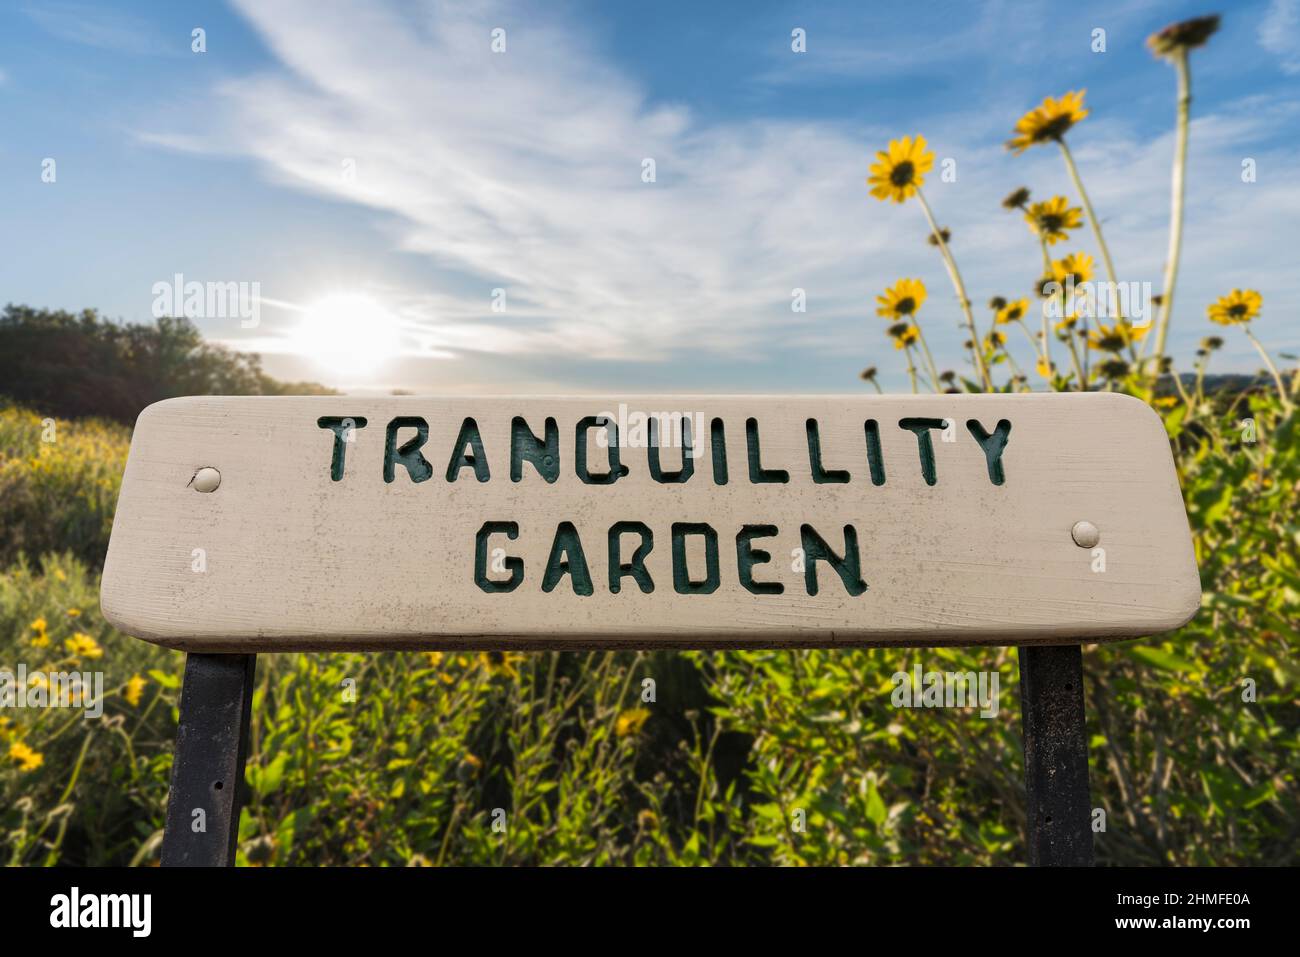 Tranquillity garden sign with yellow flowers and sunrise sky. Stock Photo